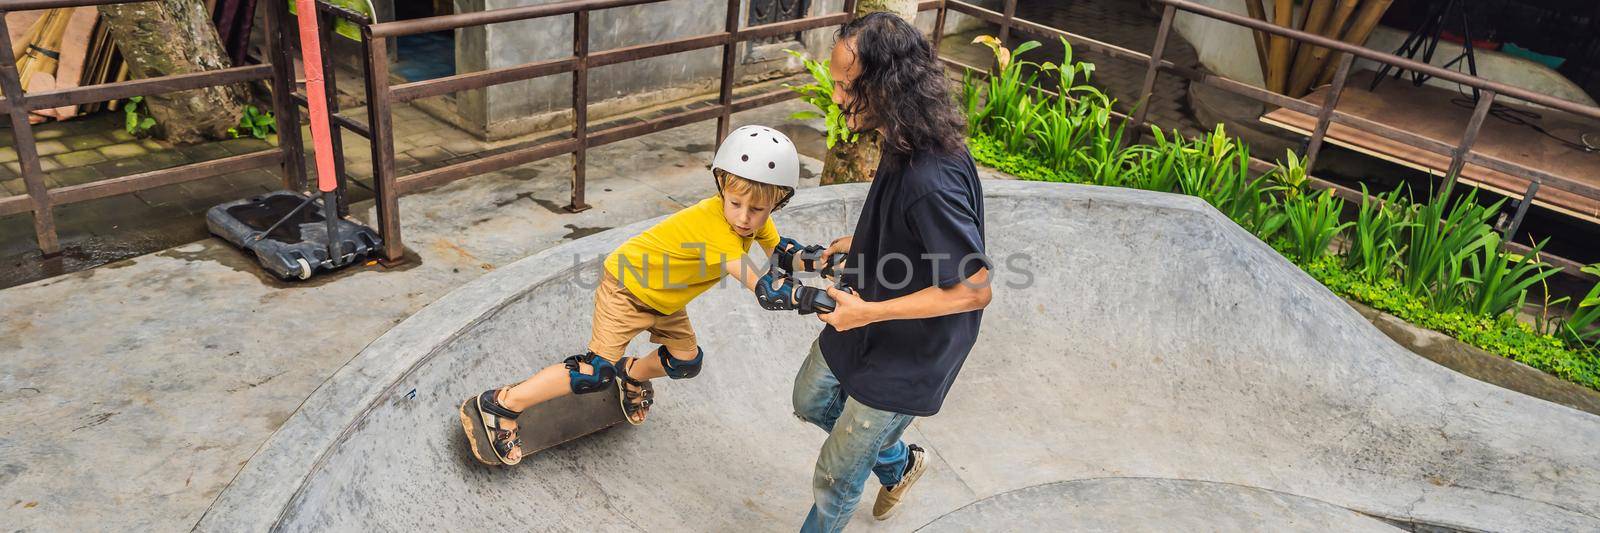 Athletic boy learns to skateboard with a trainer in a skate park. Children education, sports. BANNER, LONG FORMAT